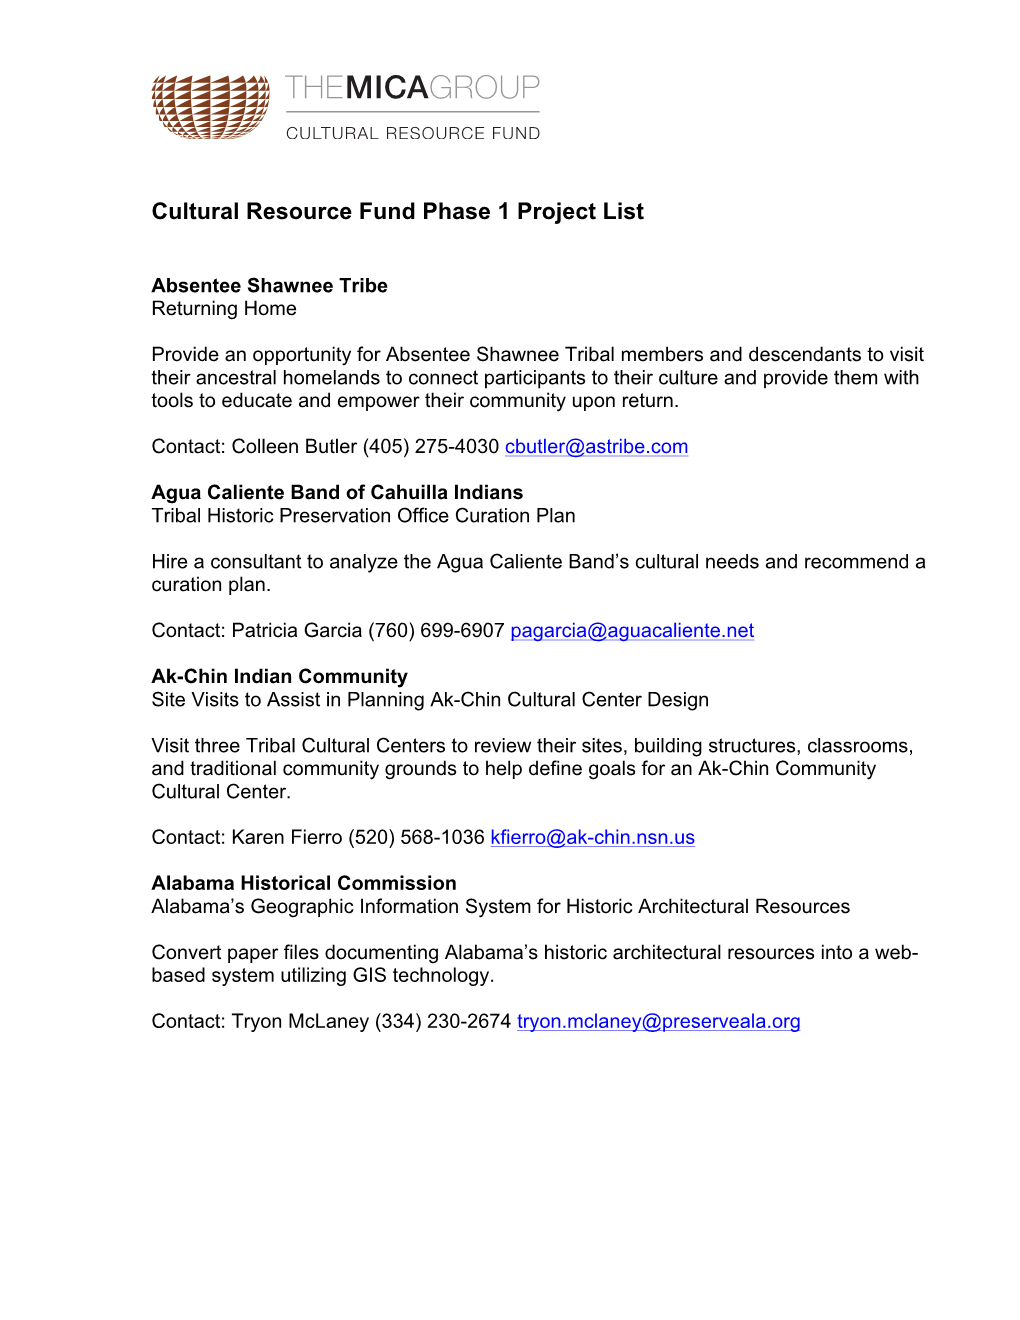 CRF Phase 1 Project List